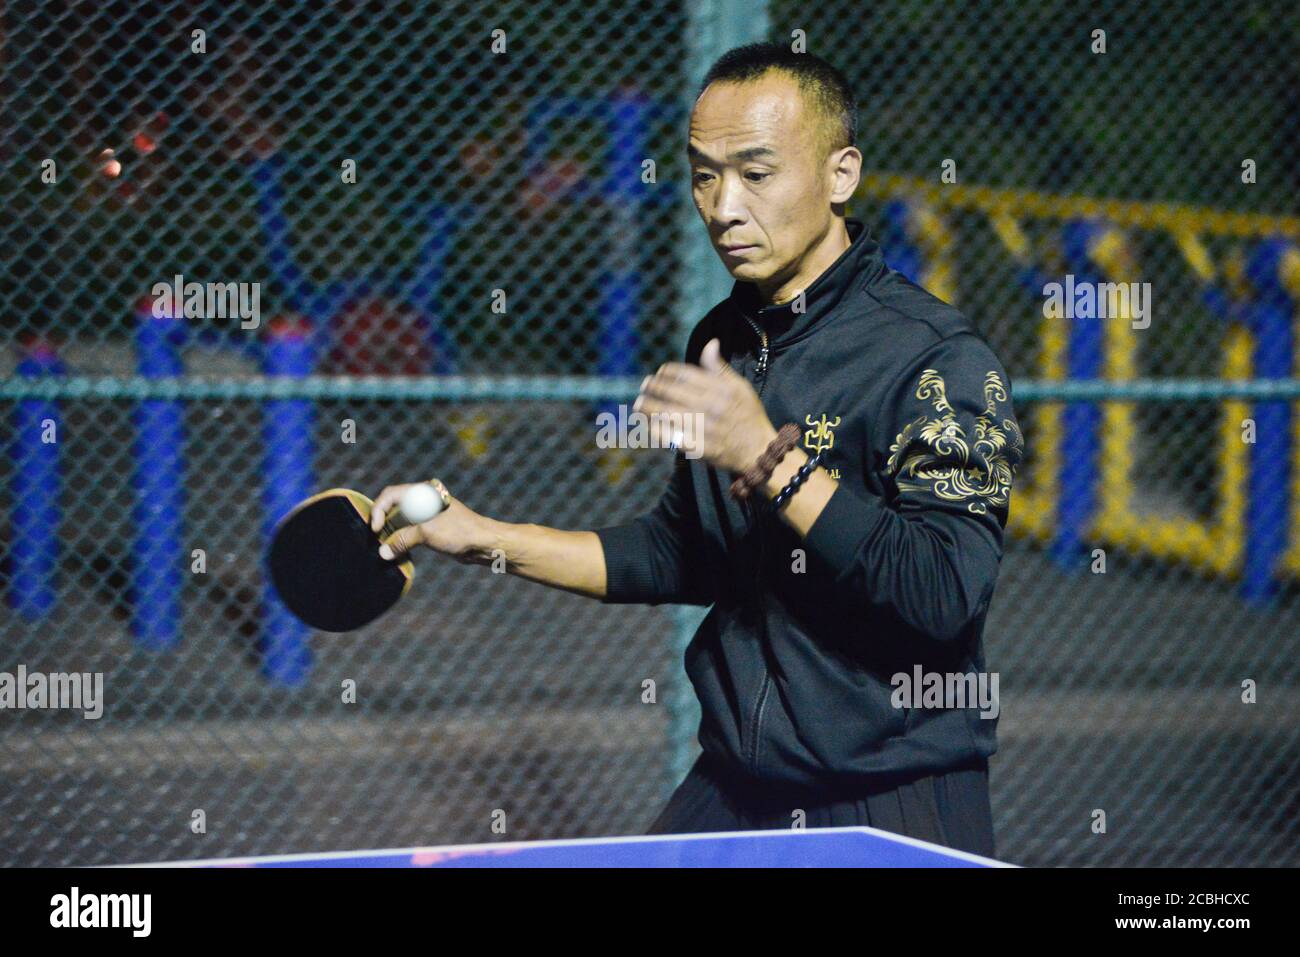 Chinese man playing table tennis in a public park, Beijing, China Stock Photo